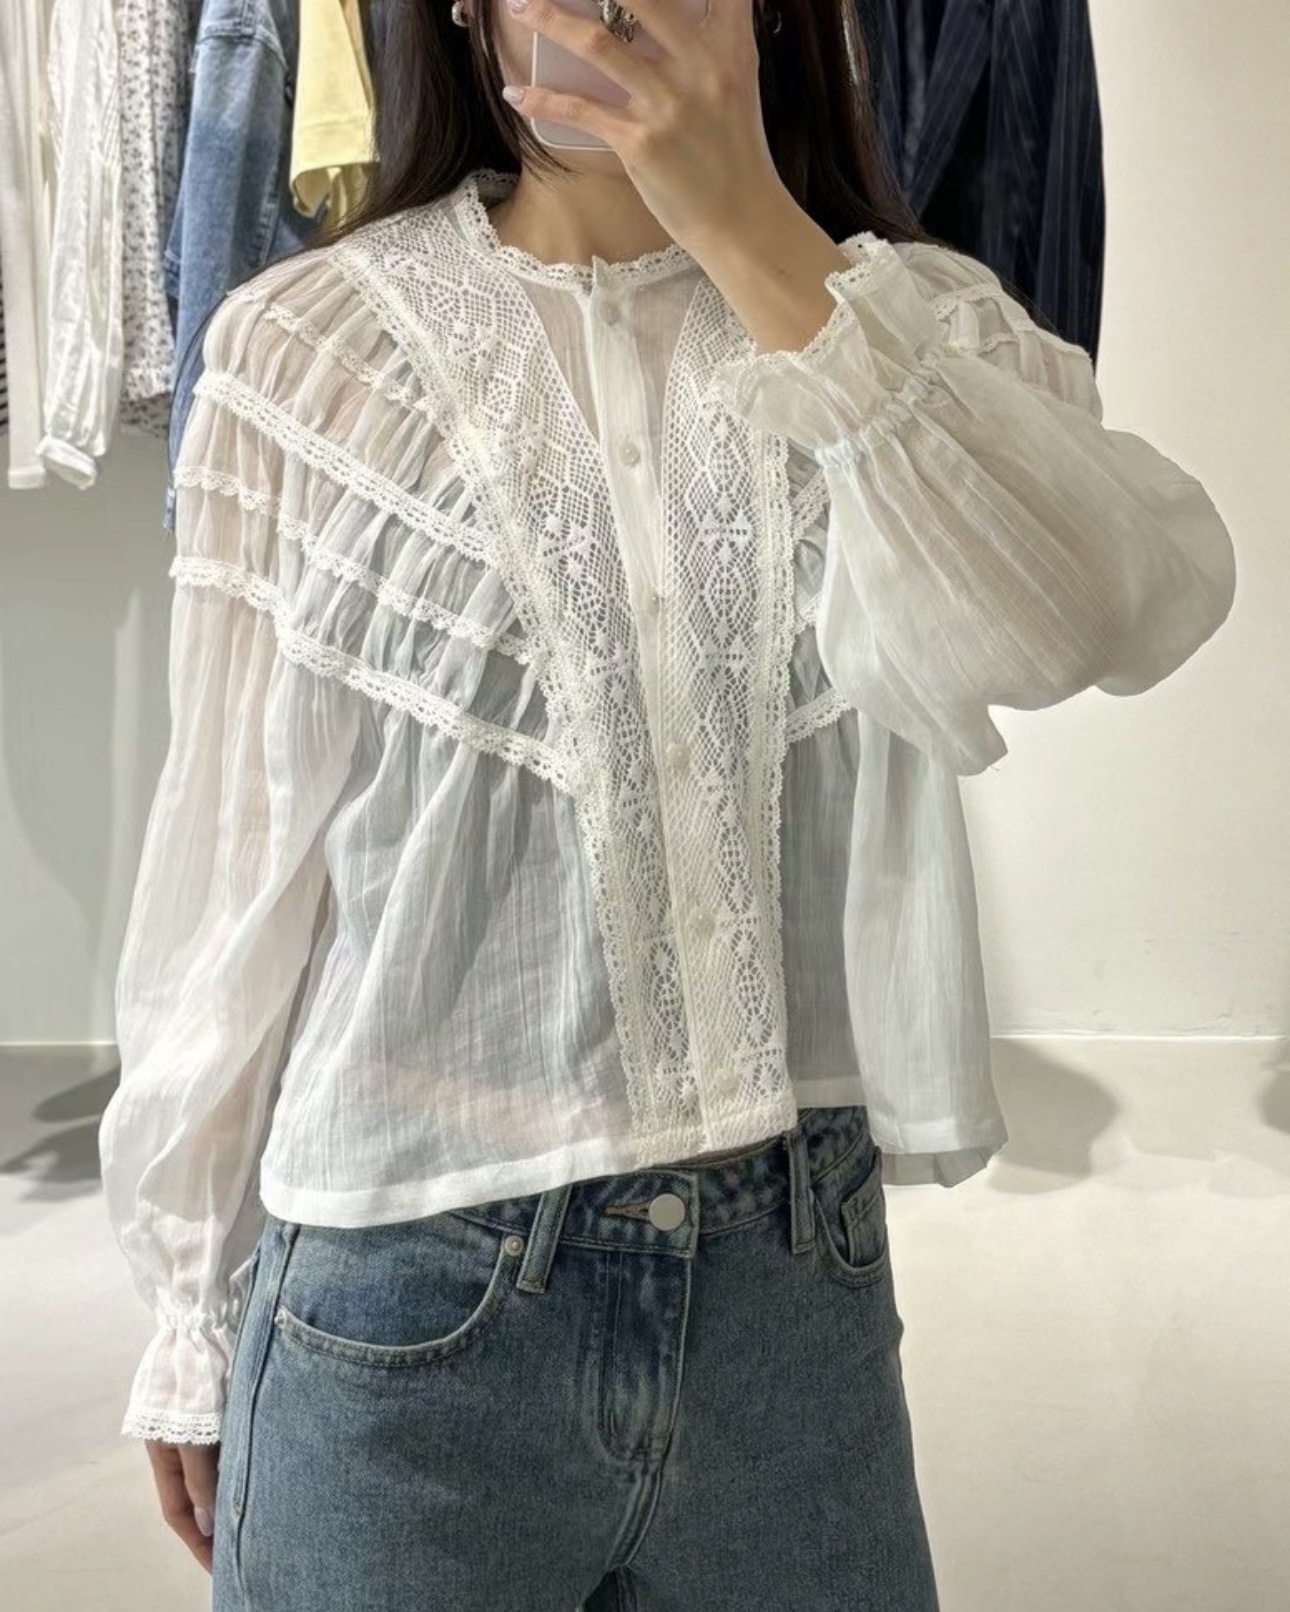 Creased Light Lace Blouse